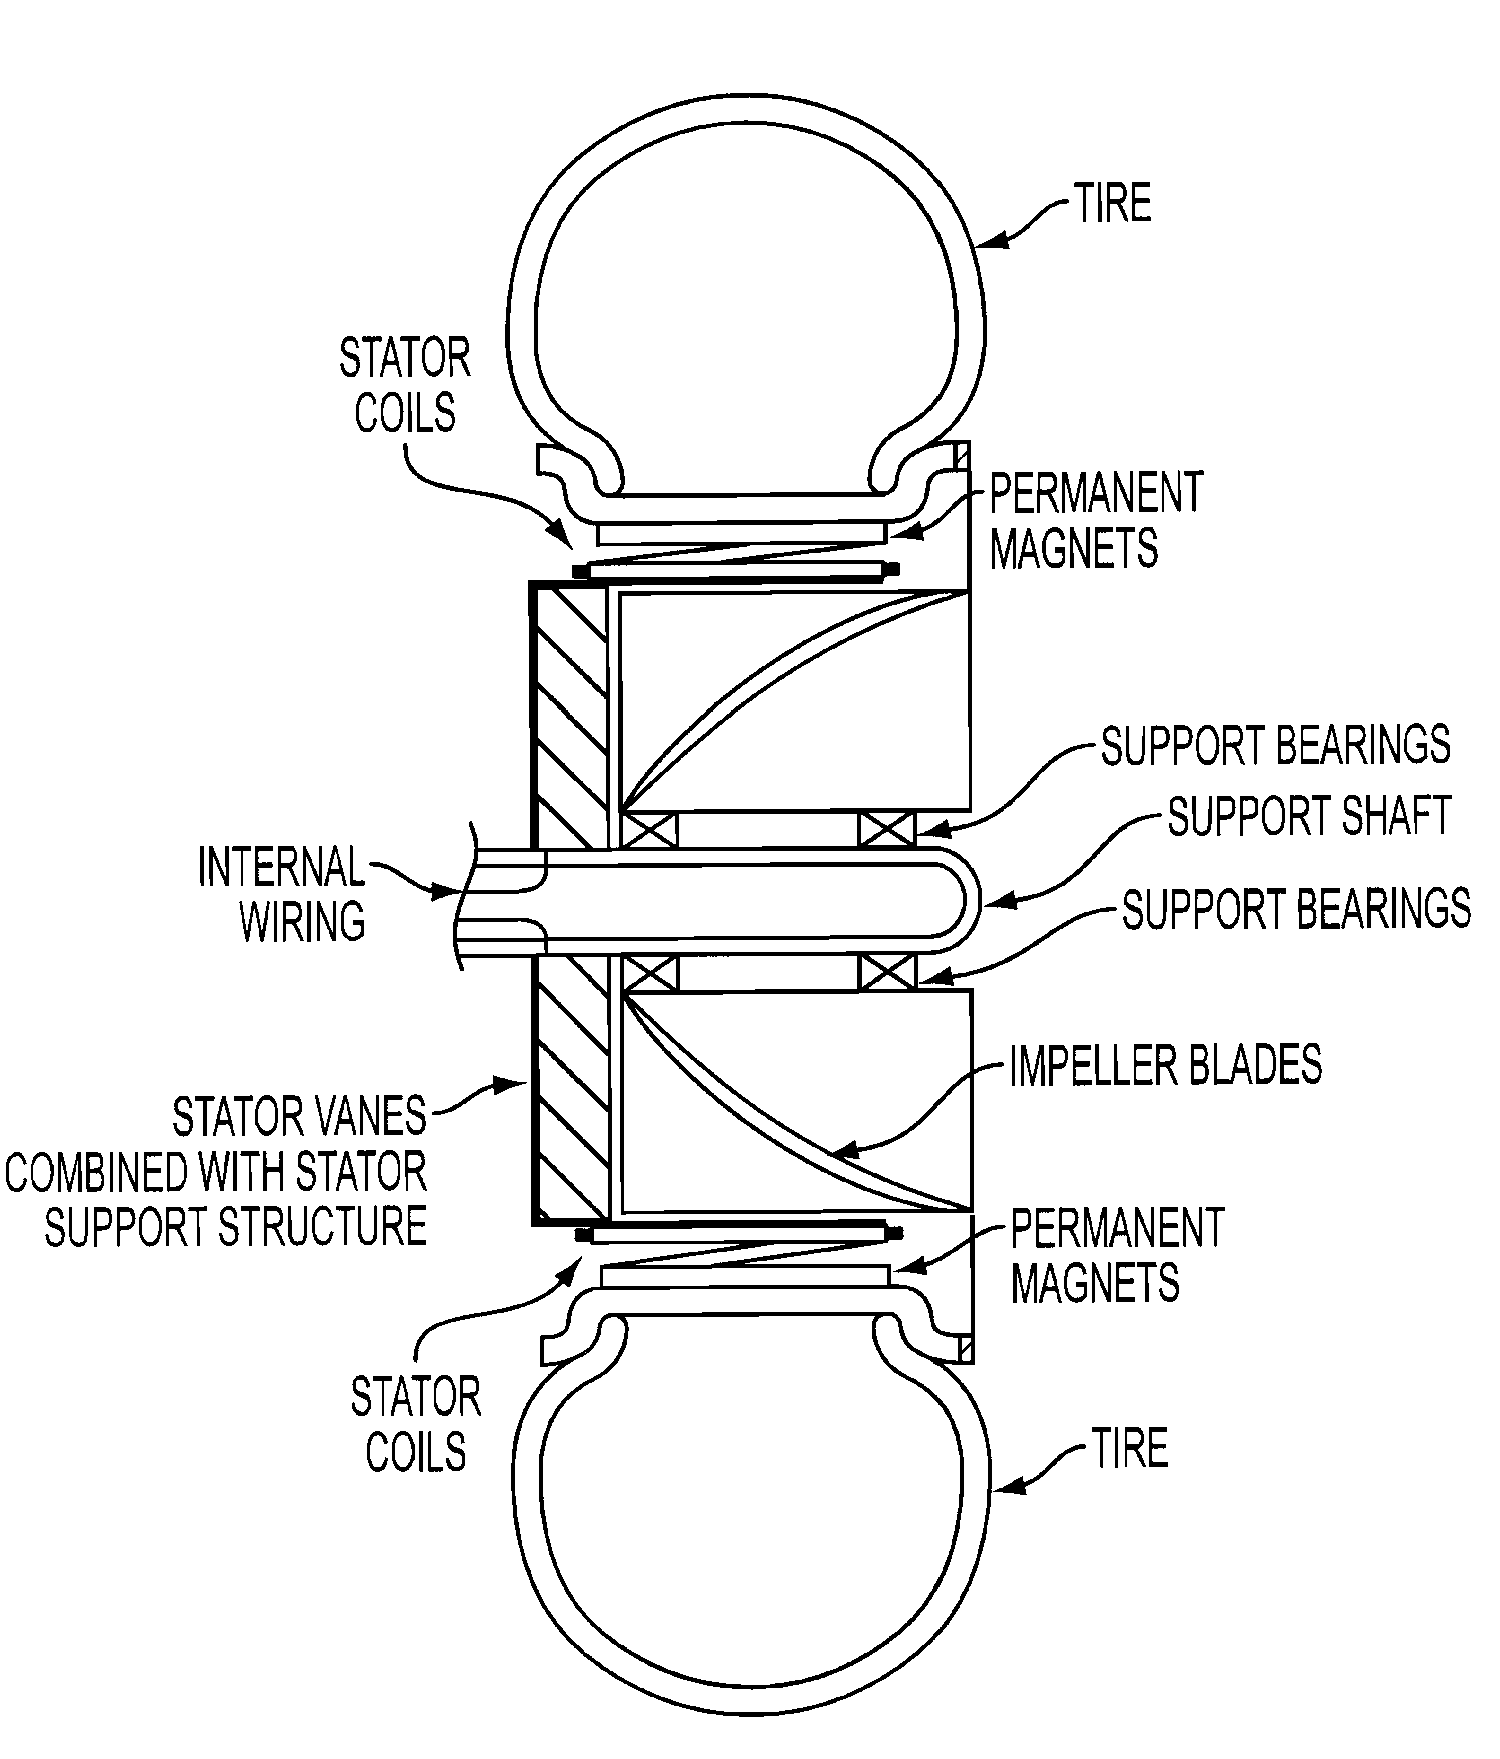 Method and apparatus for powering of amphibious craft